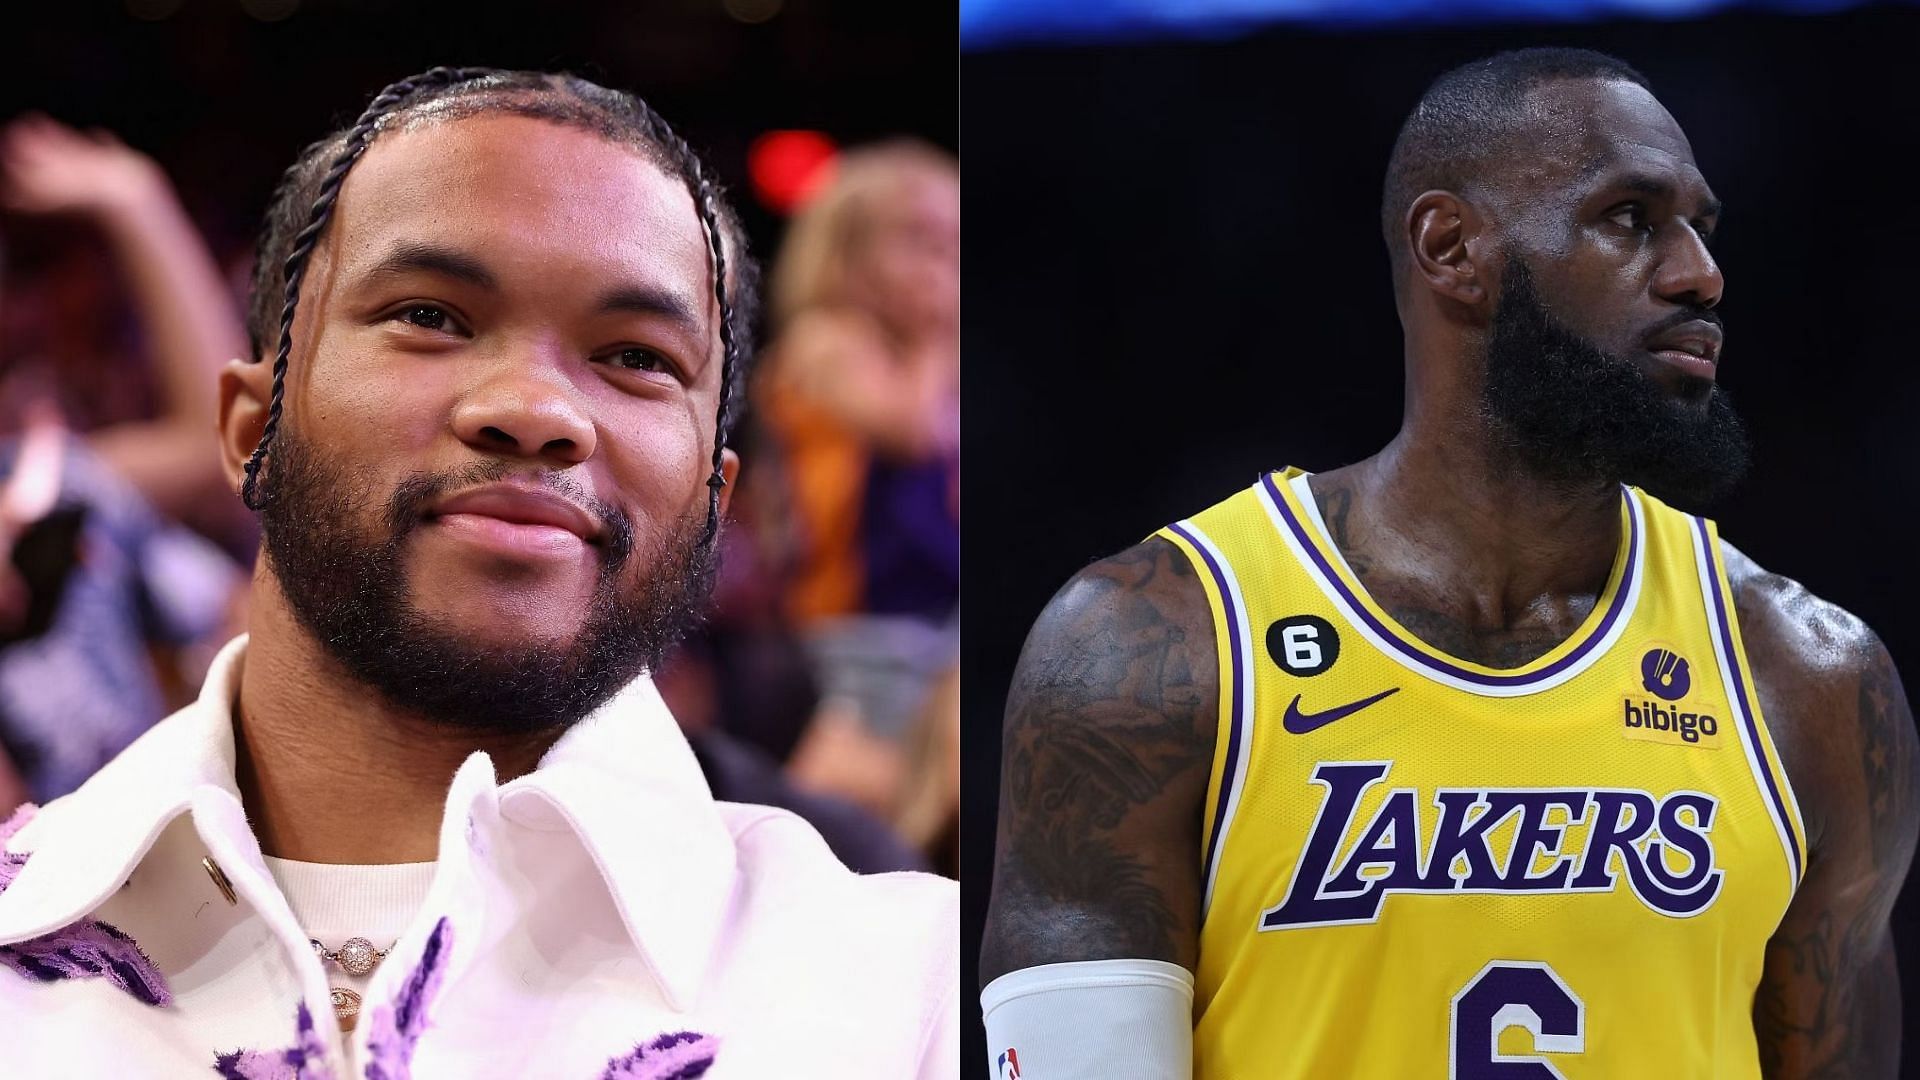 Arizona Cardinals quarterback Kyler Murray had something to say about the non-calls by the referees against LeBron James.